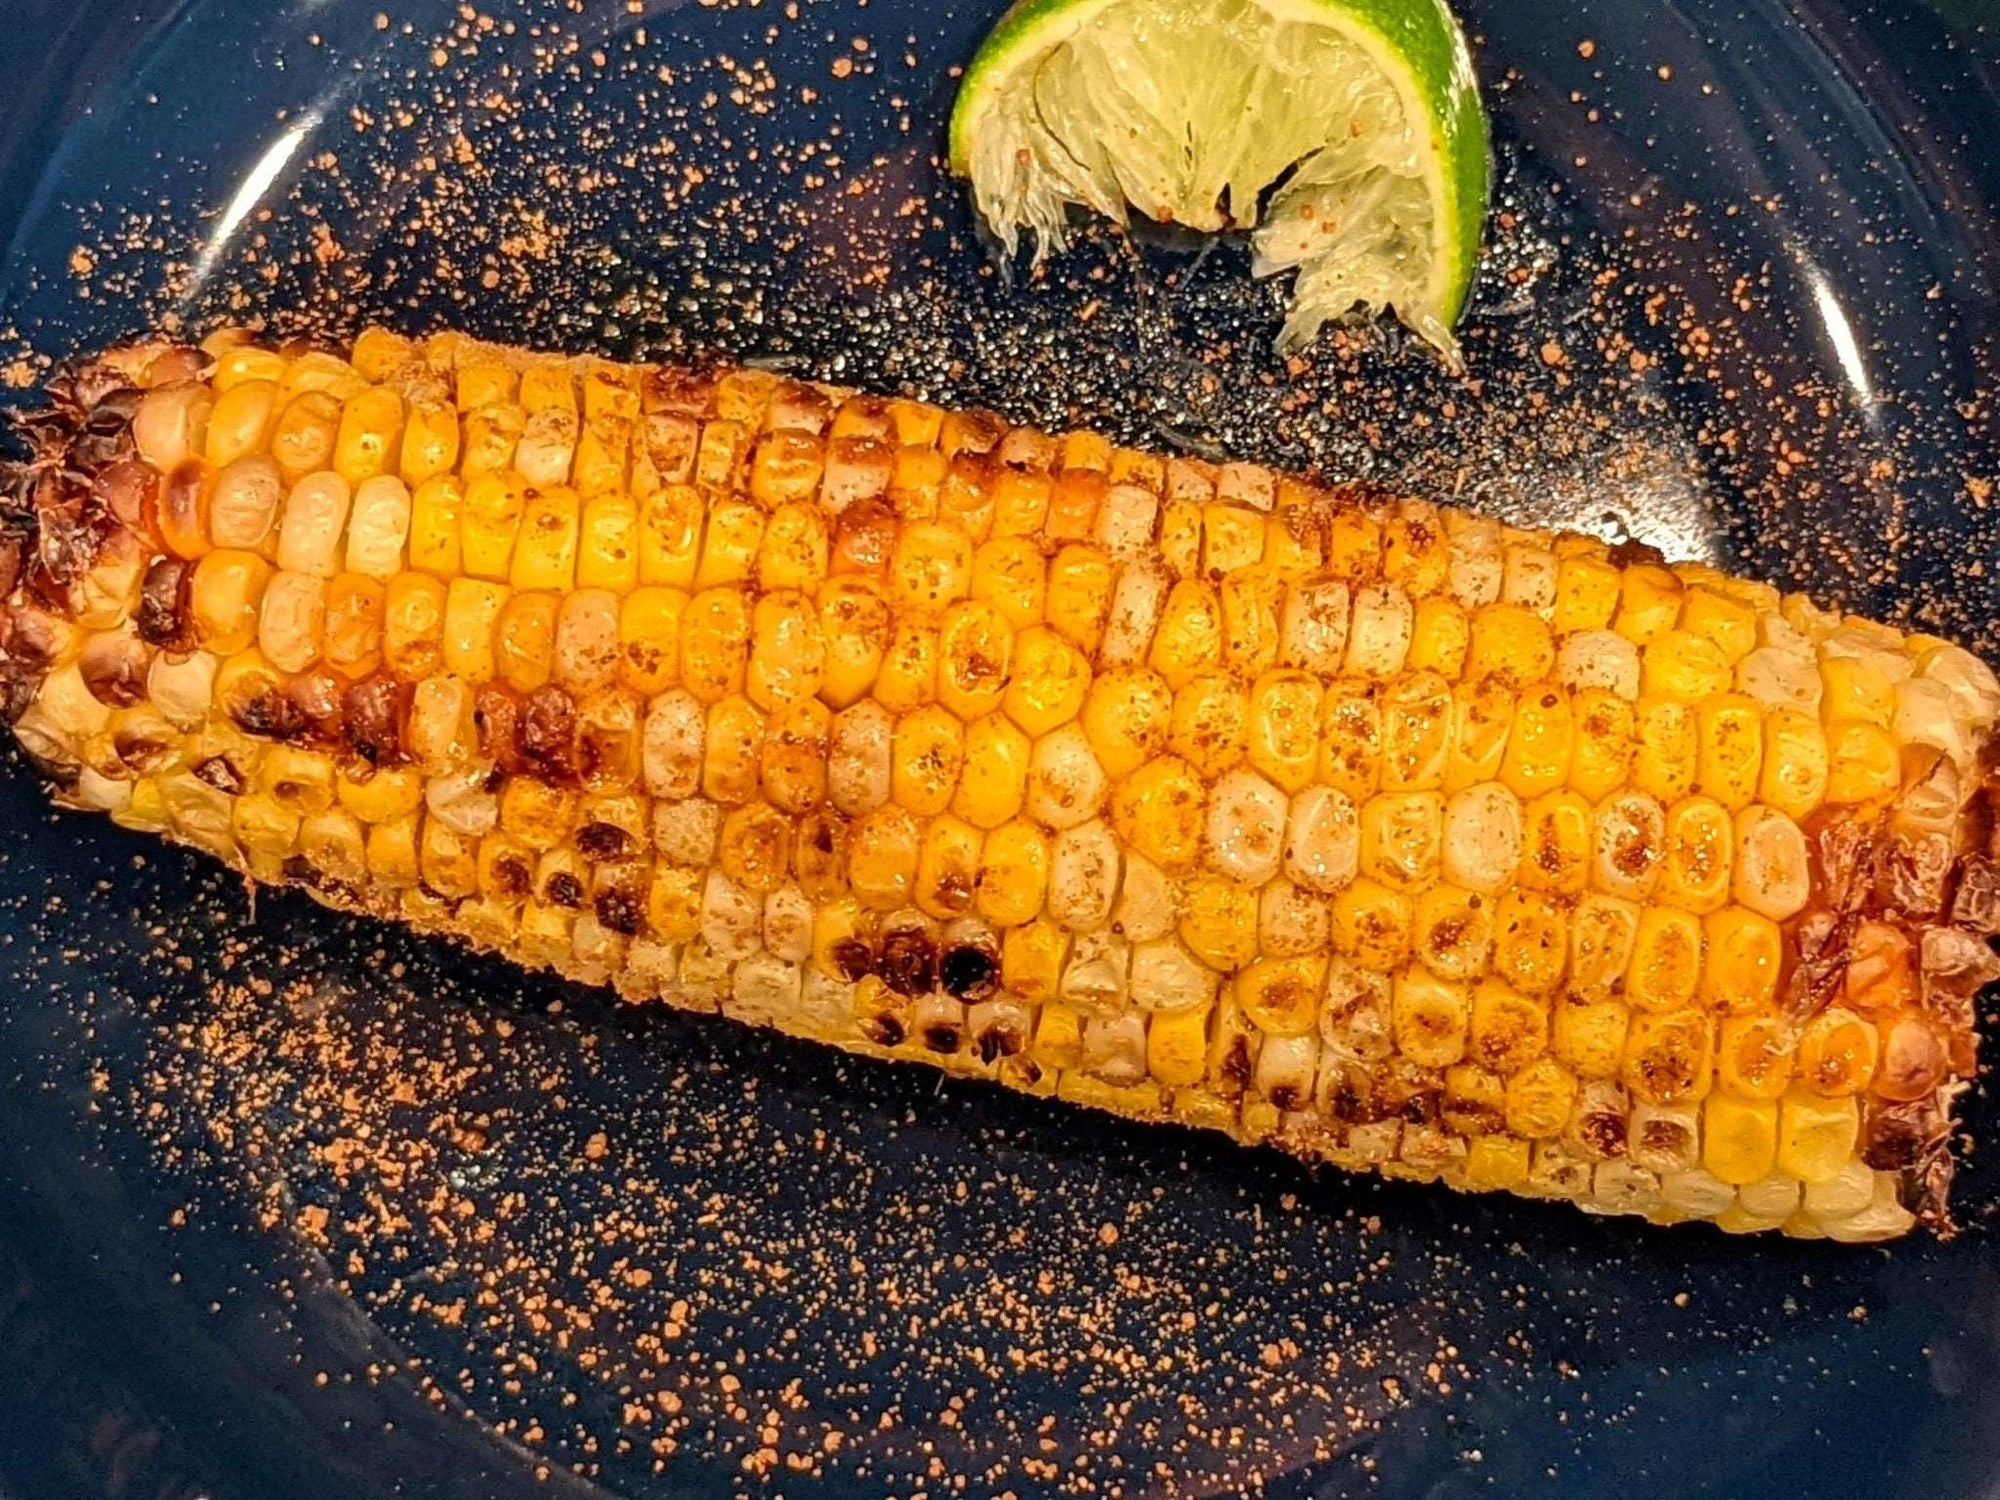 Sprinkle DHOL Popcorn spice on grilled corn for a flavorful summer treat